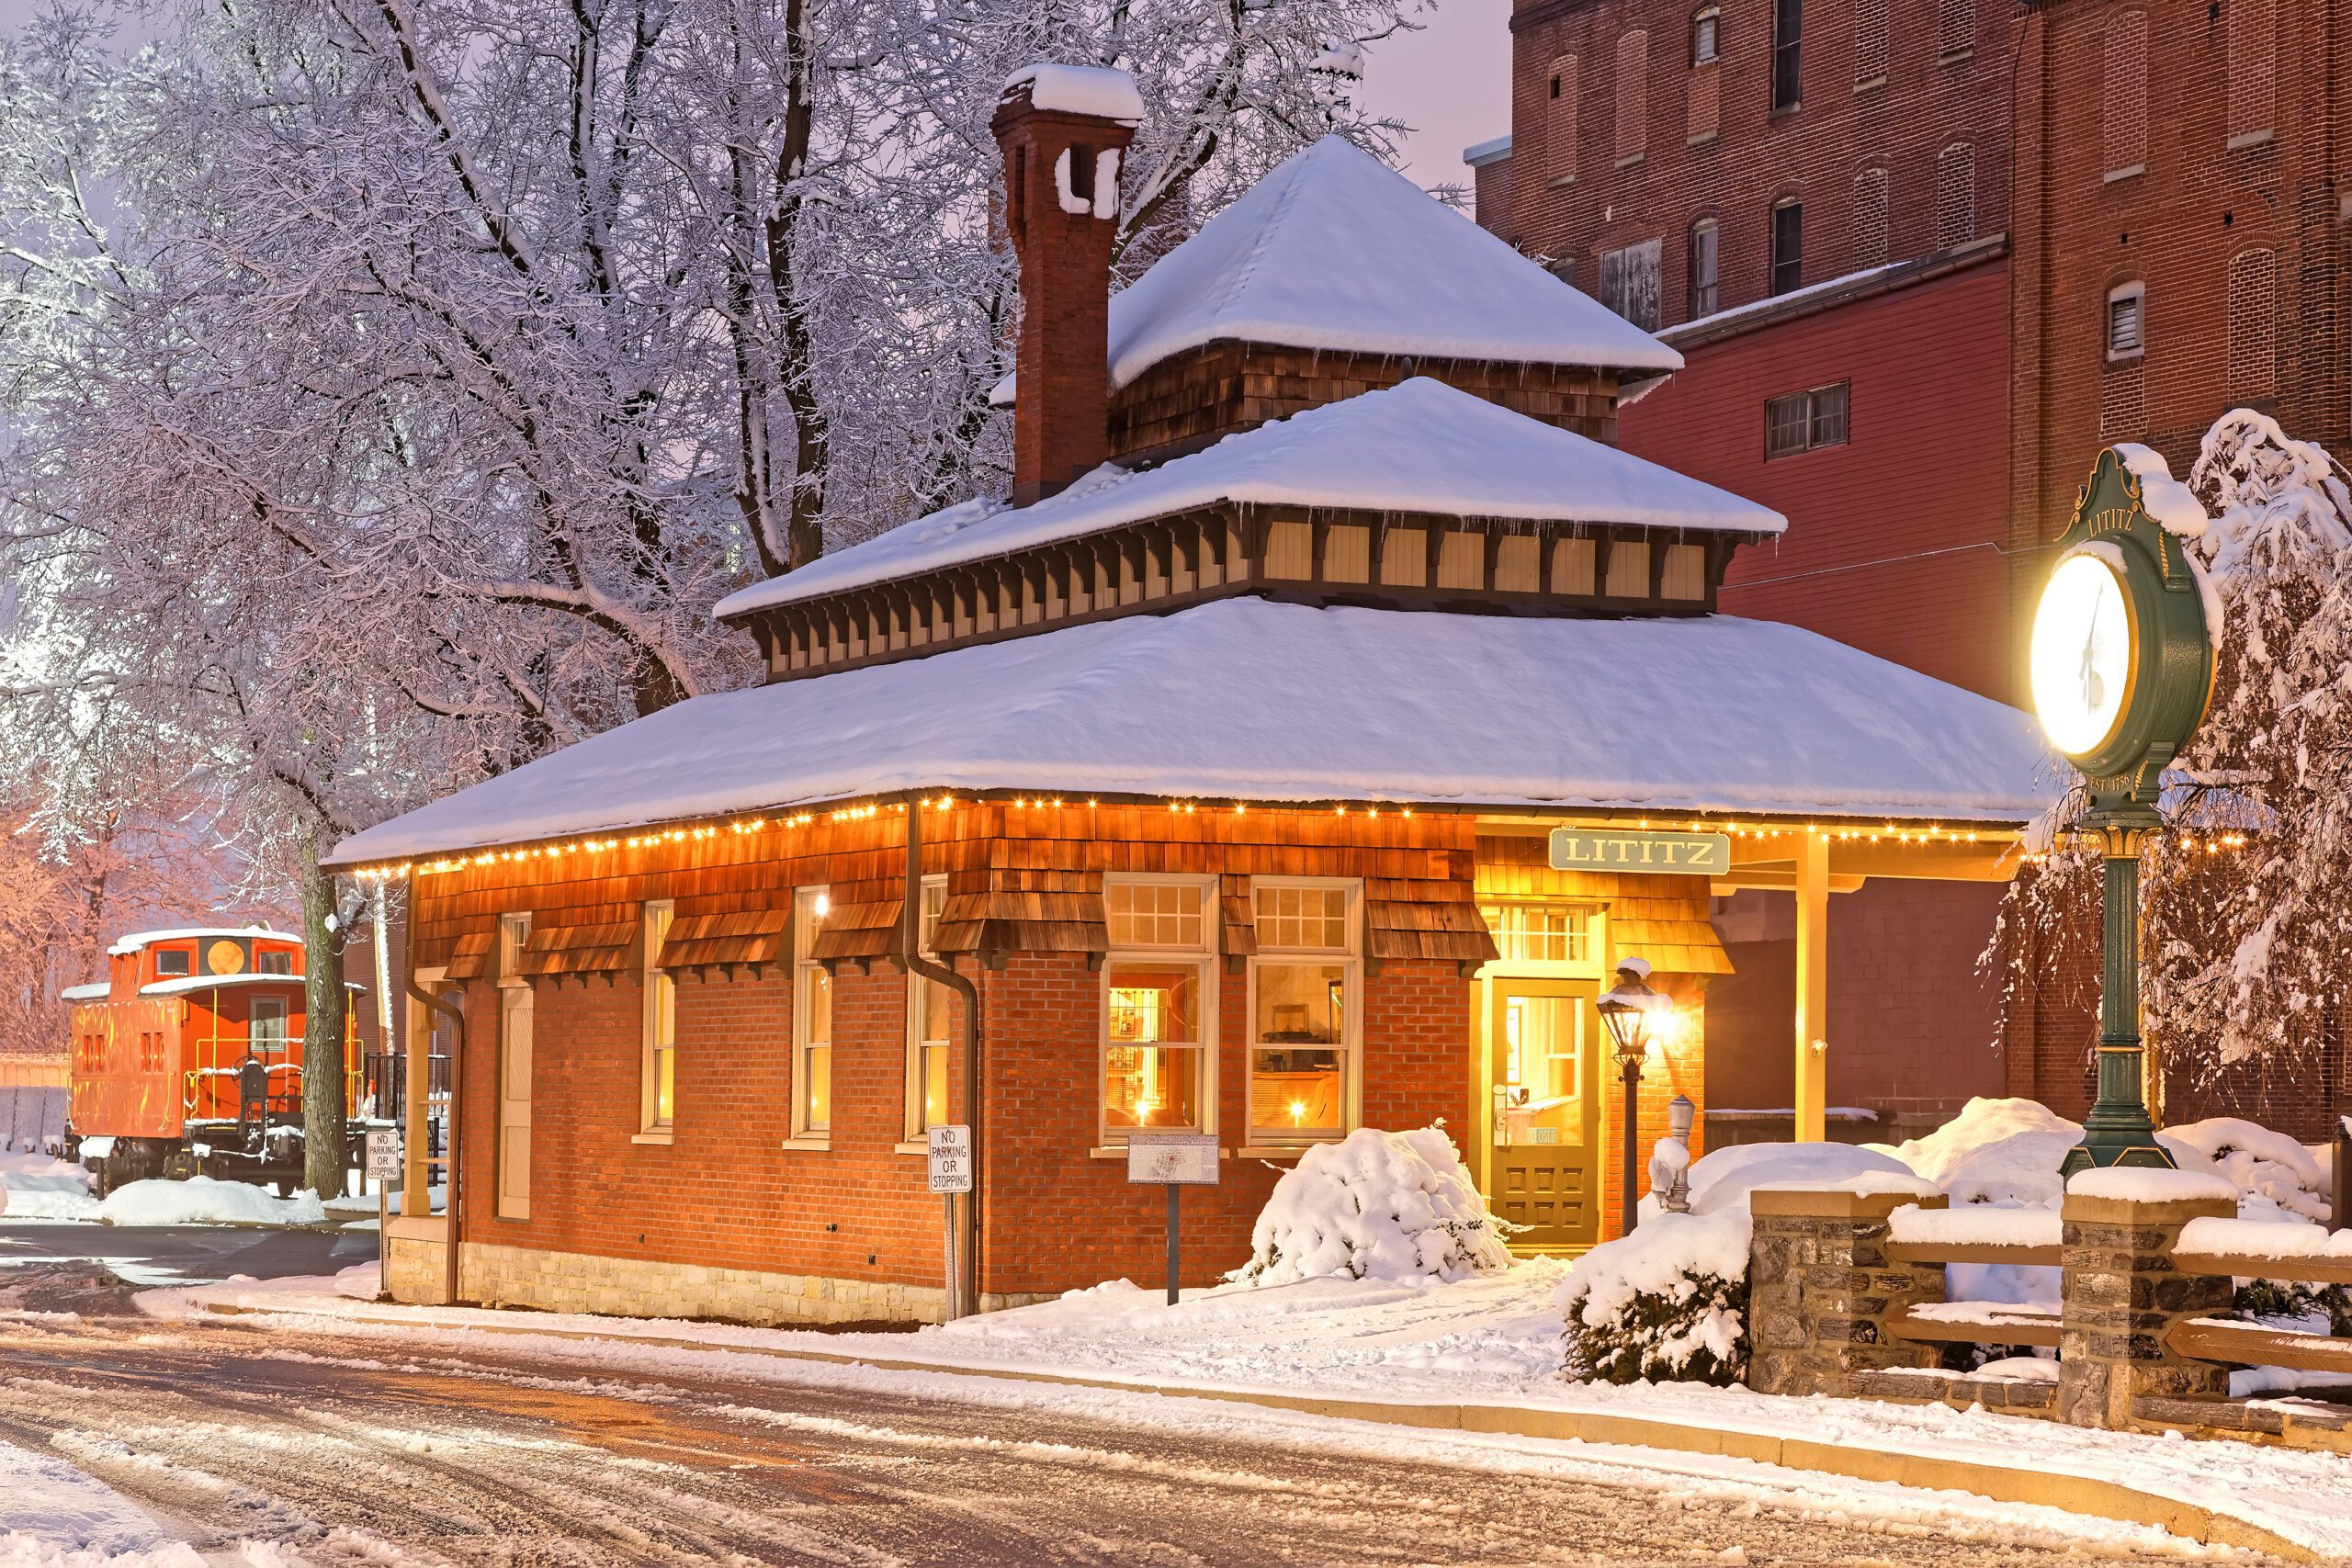 Snow fall at the old railroad station in Lititz, Pennsylvania.